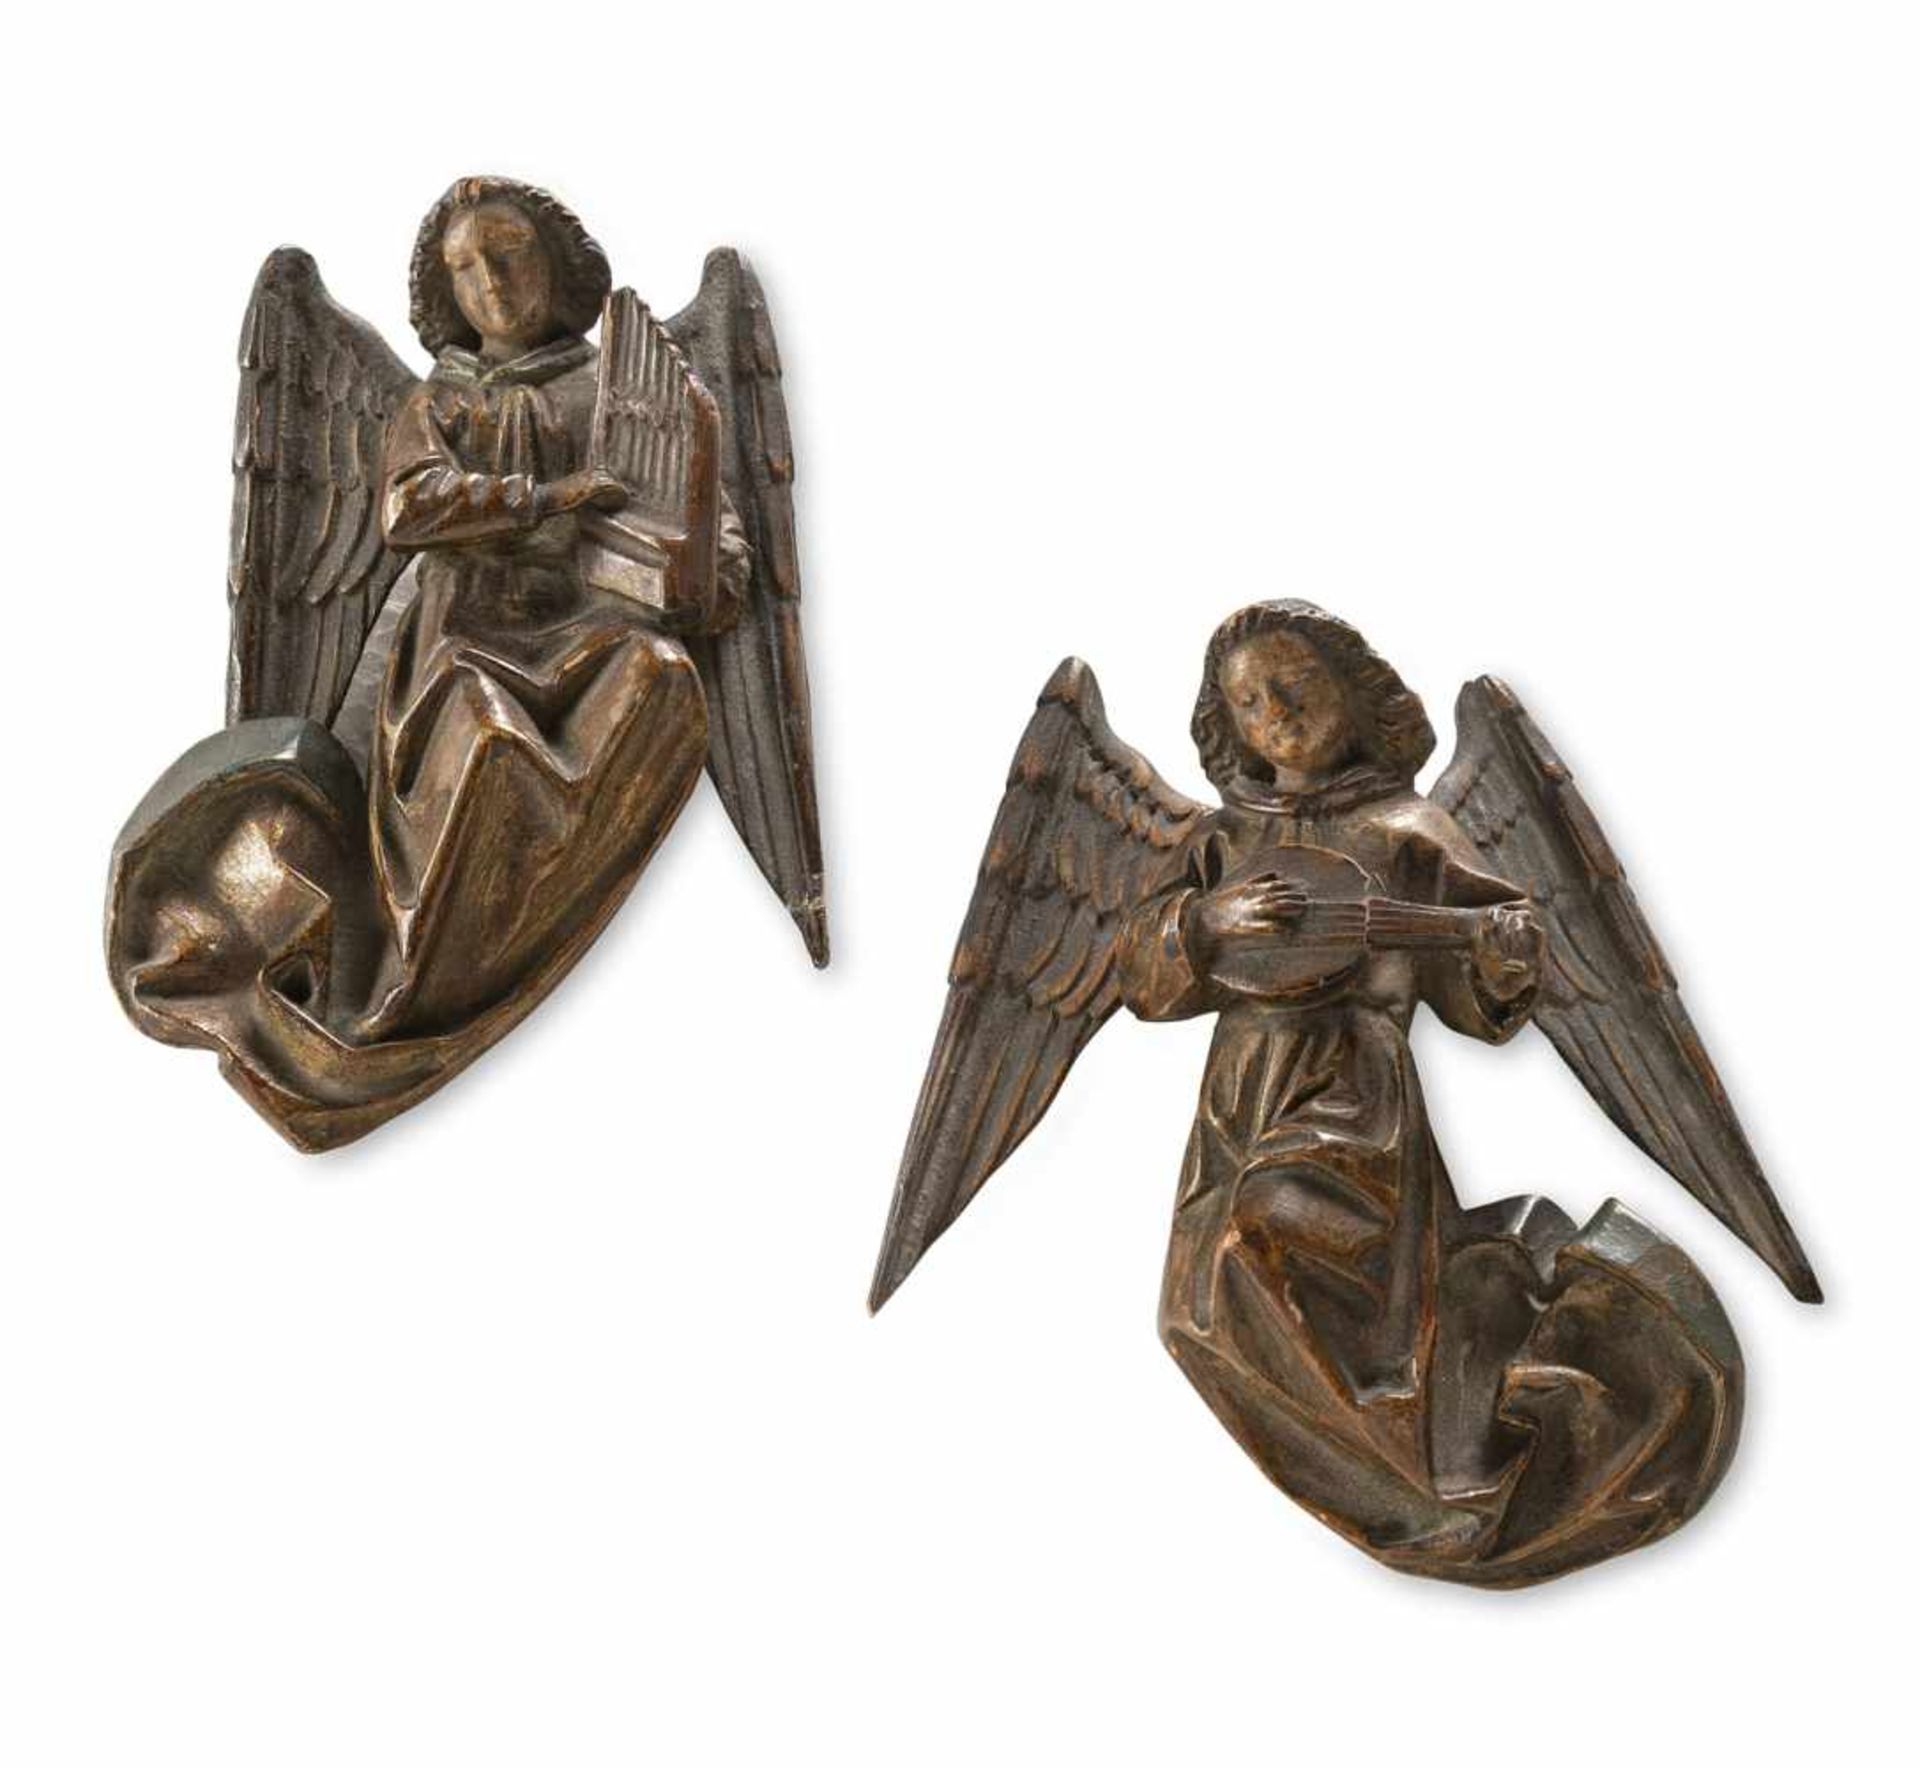 A PAIR OF MUSIC MAKING GLORIFICATION ANGELS, Medieval style, late 19th century. Limewood, carved